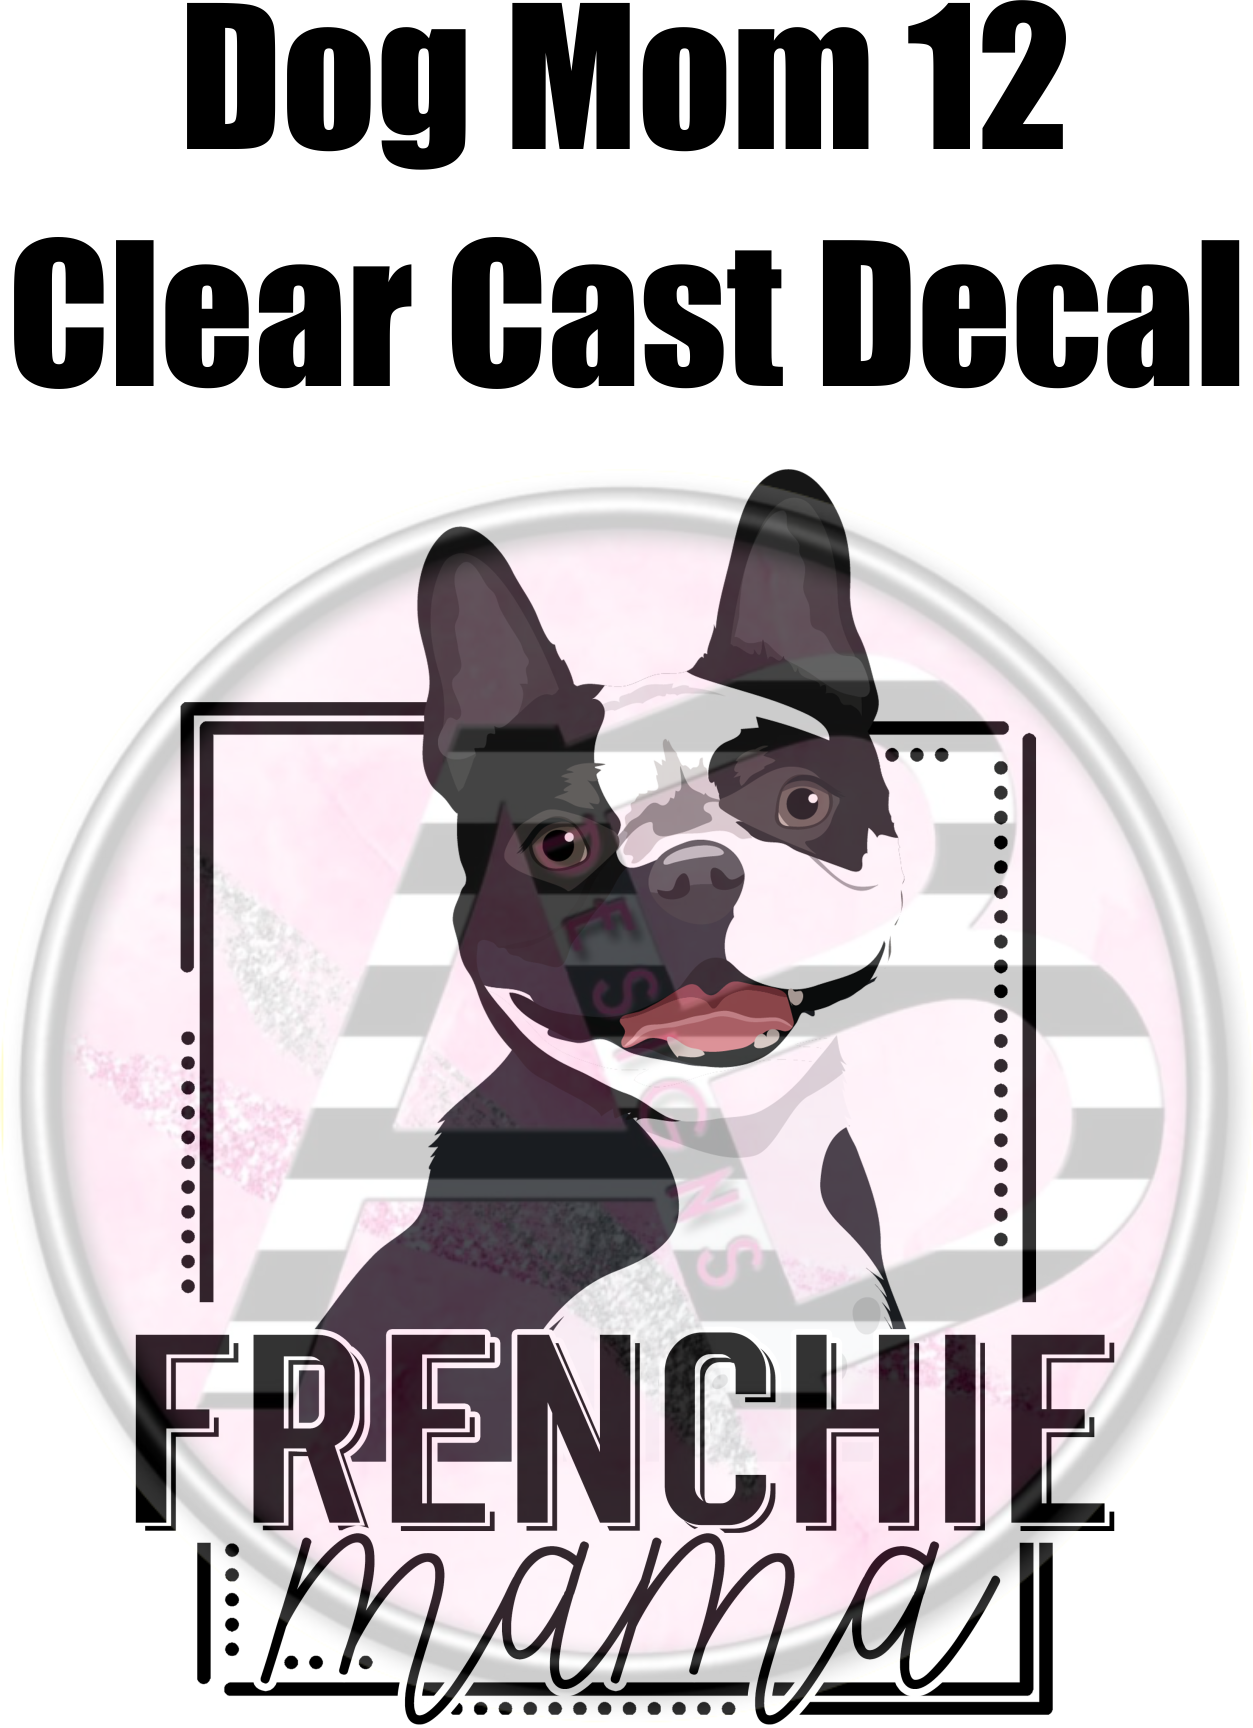 Dog Mom 12 - Clear Cast Decal - 100